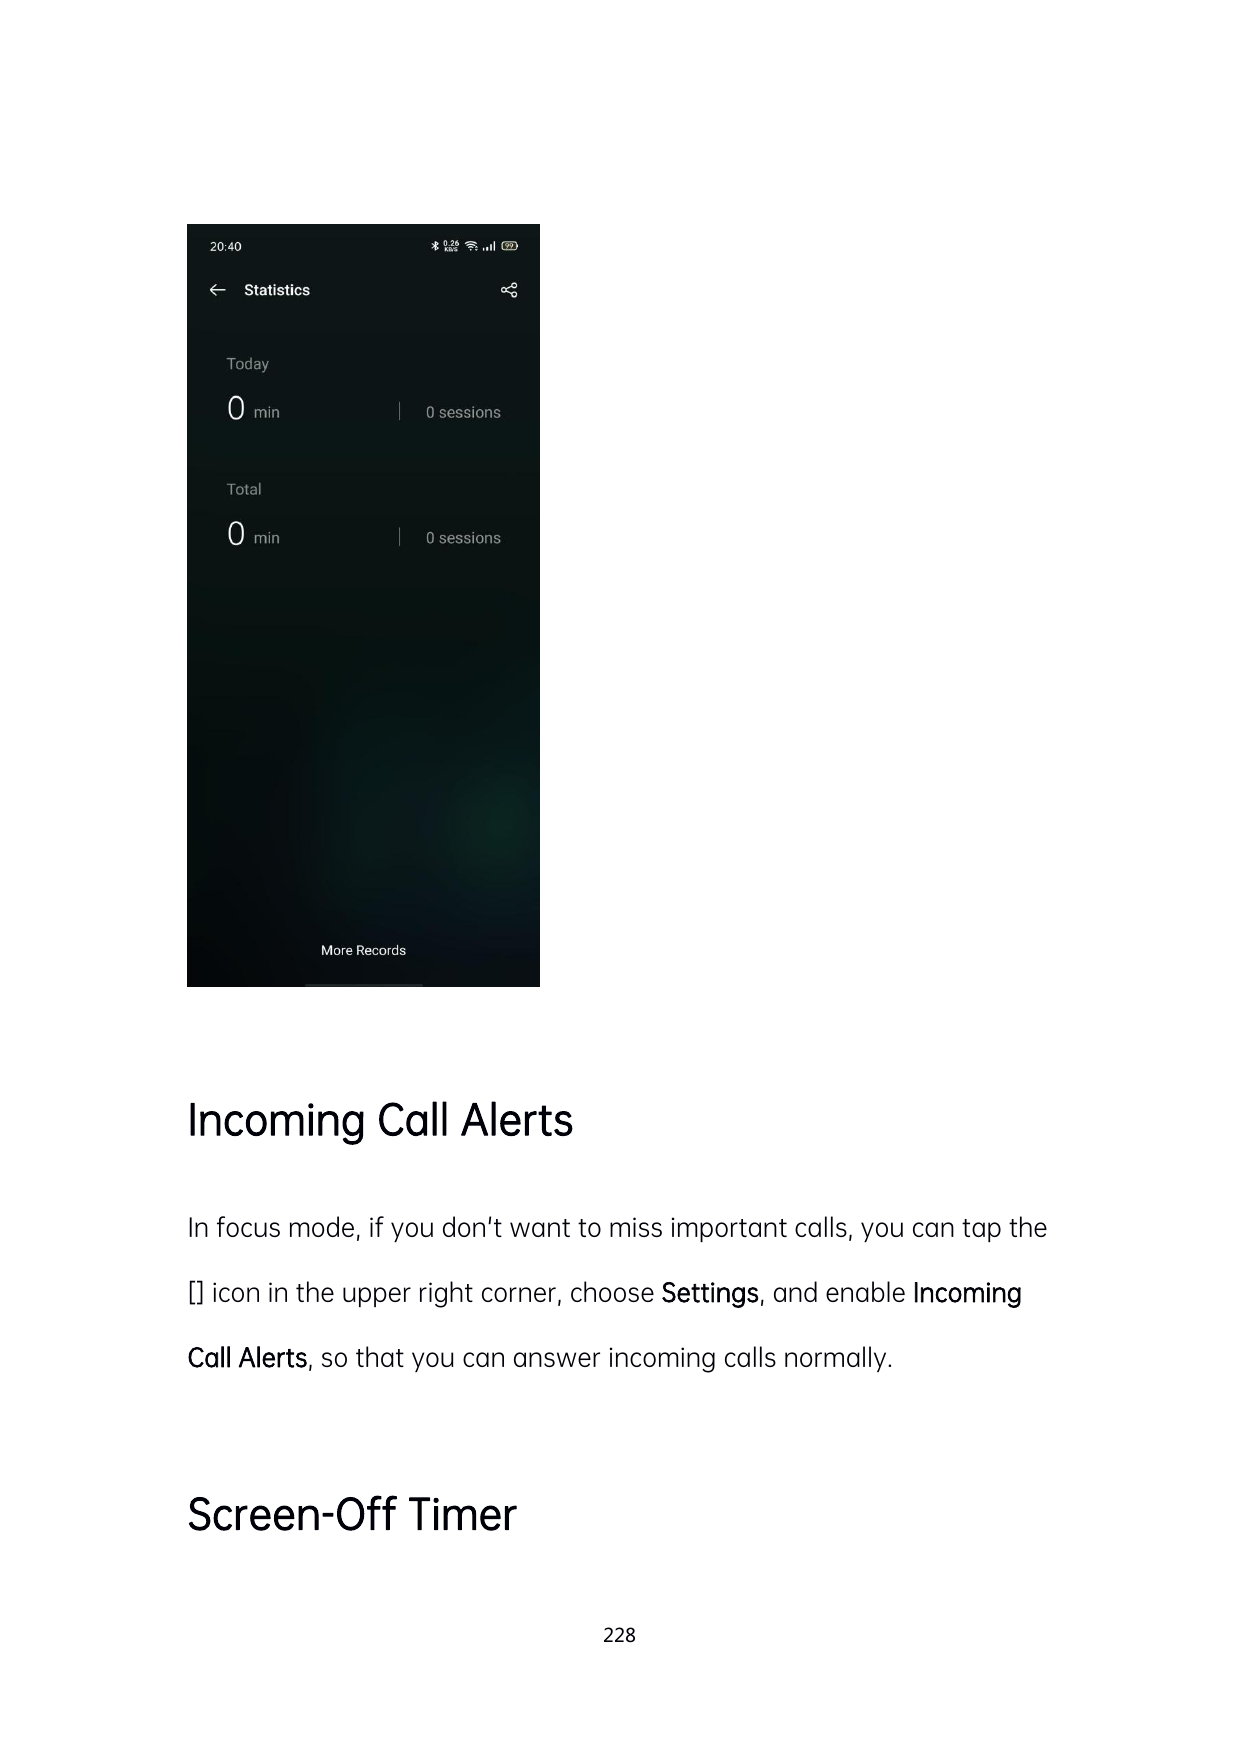 Incoming Call AlertsIn focus mode, if you don't want to miss important calls, you can tap the[] icon in the upper right corner, 